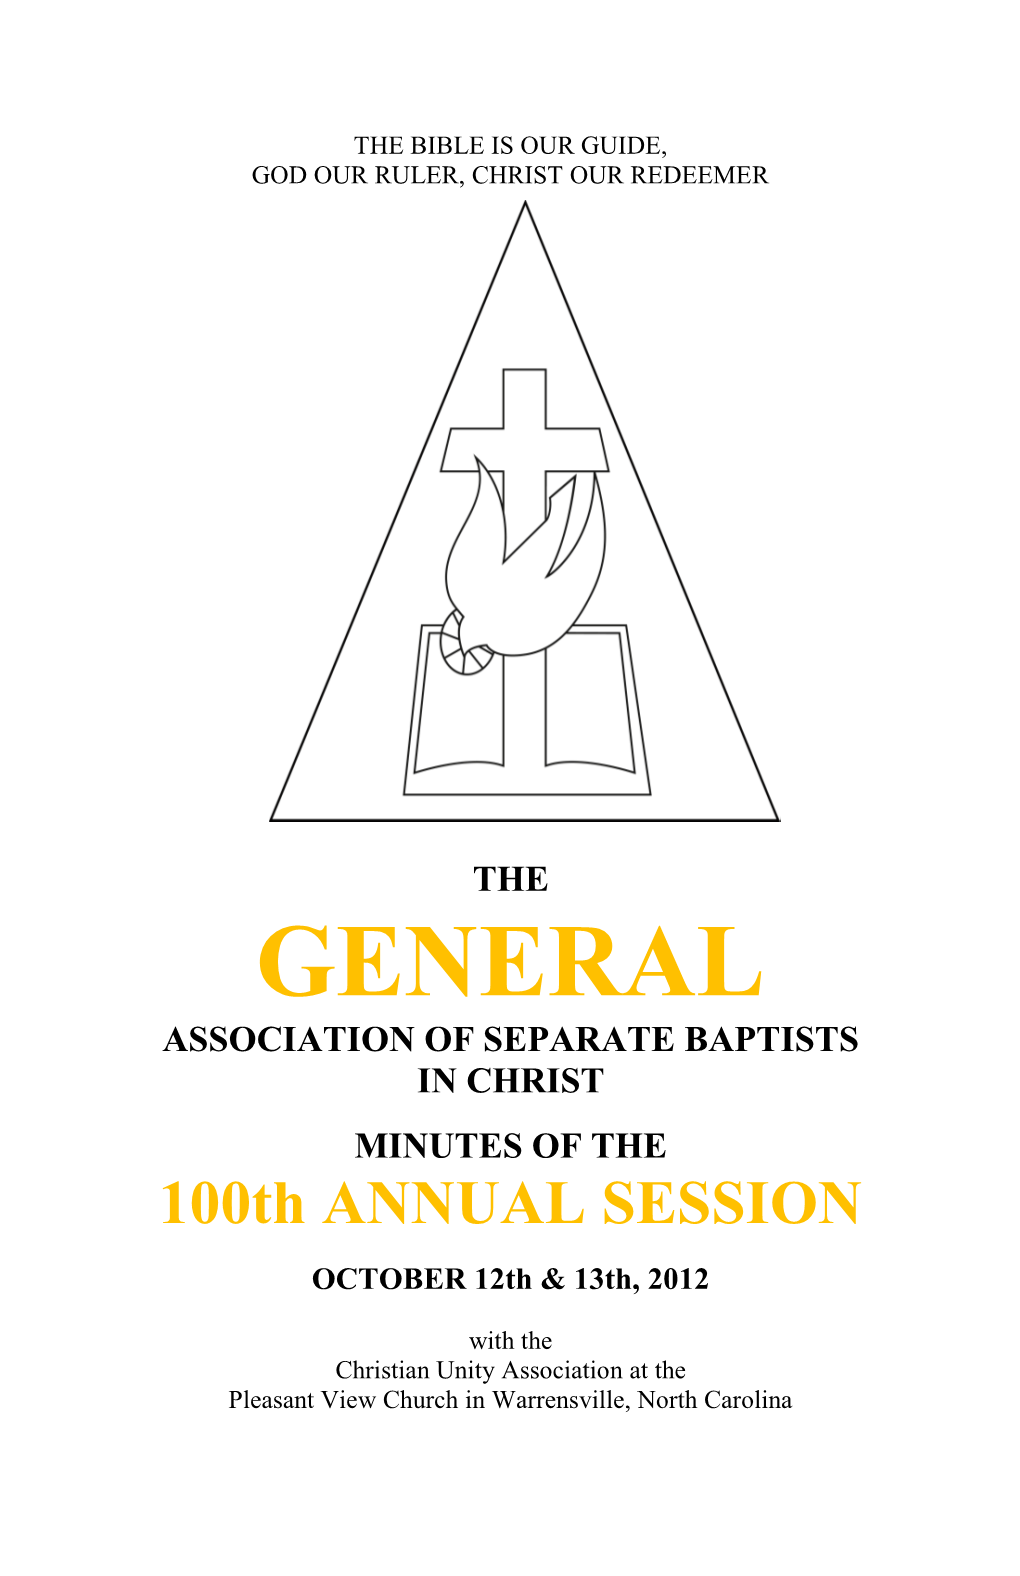 General Association of Separate Baptists in Christ